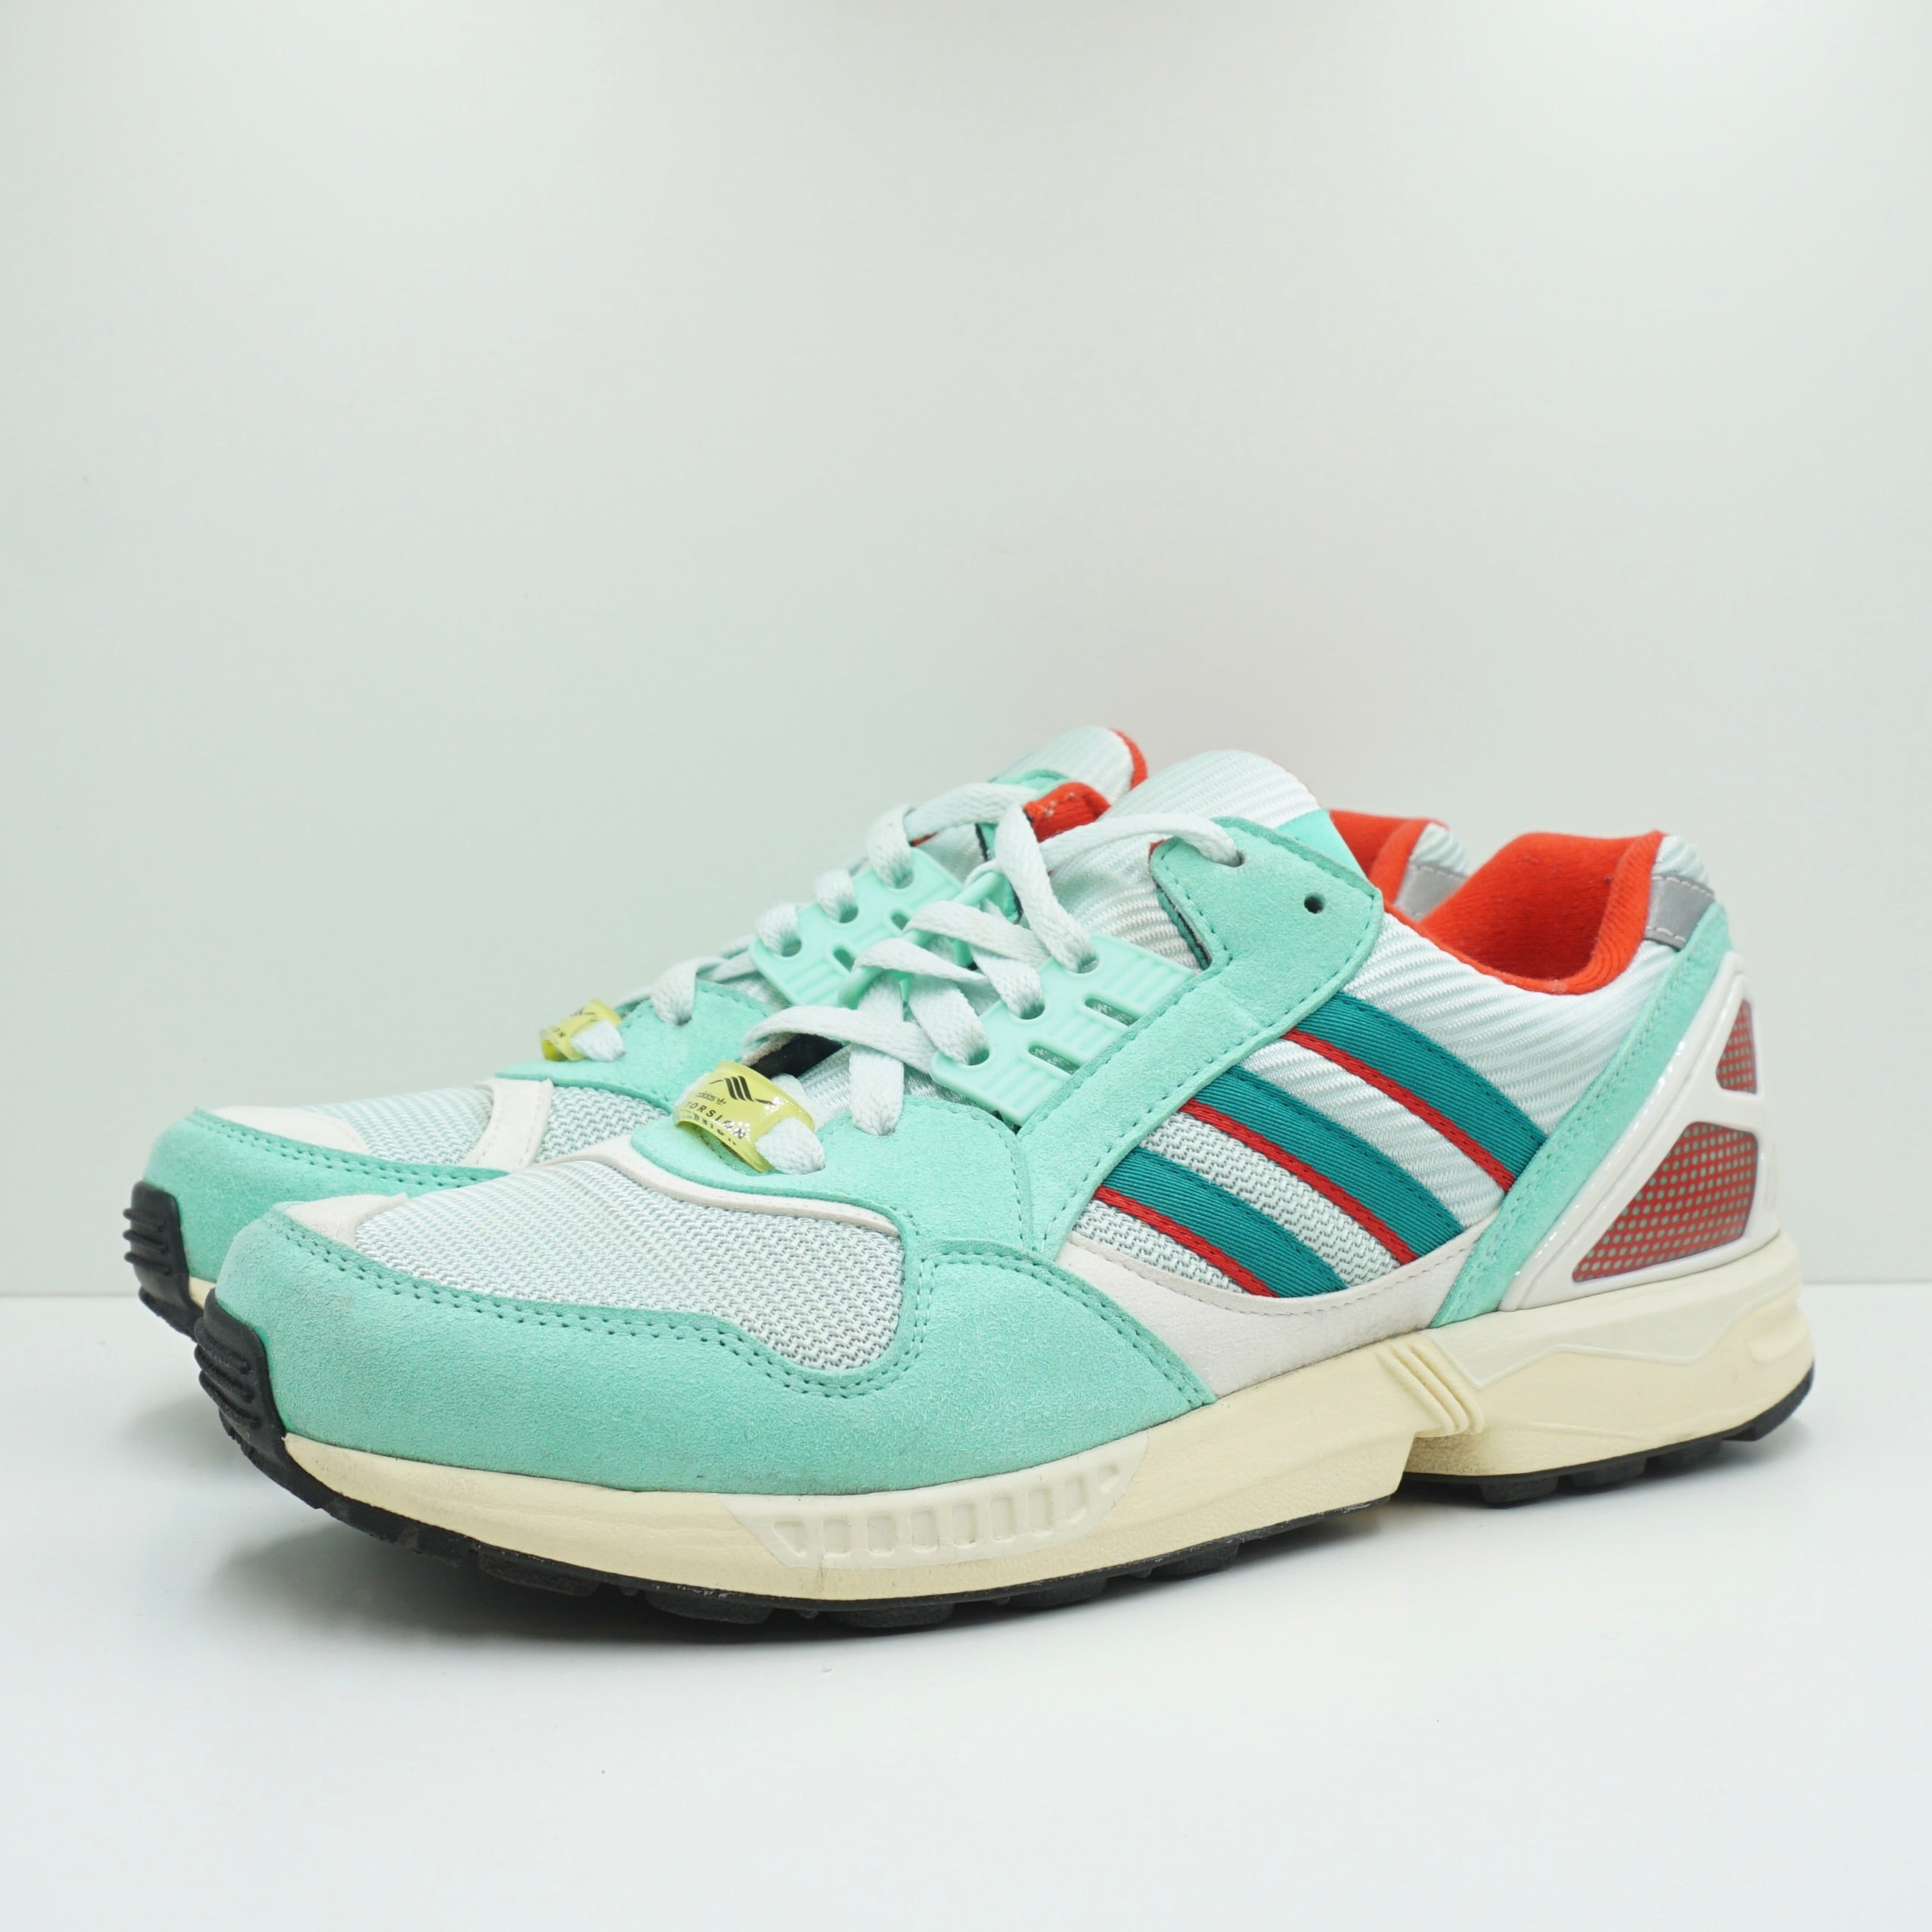 Adidas ZX 9000 30 Years of Torsion